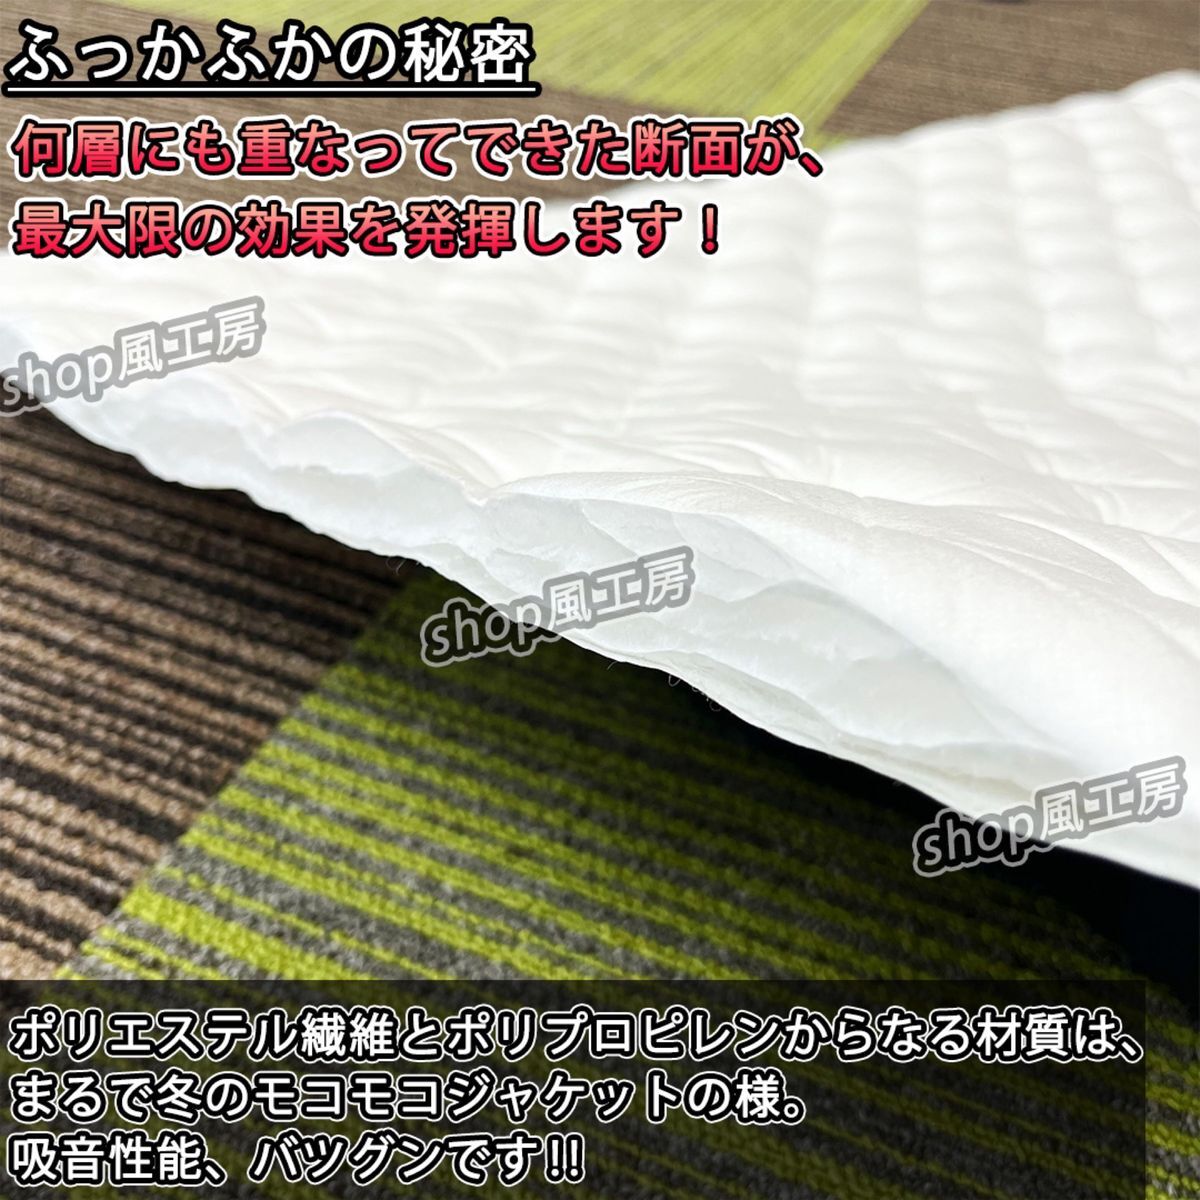 [ big size ] newest. sound-absorbing material 2 pieces set! deadning make person . respondent .! deadning seat [ sound quality improvement, soundproof material,. sound material ]